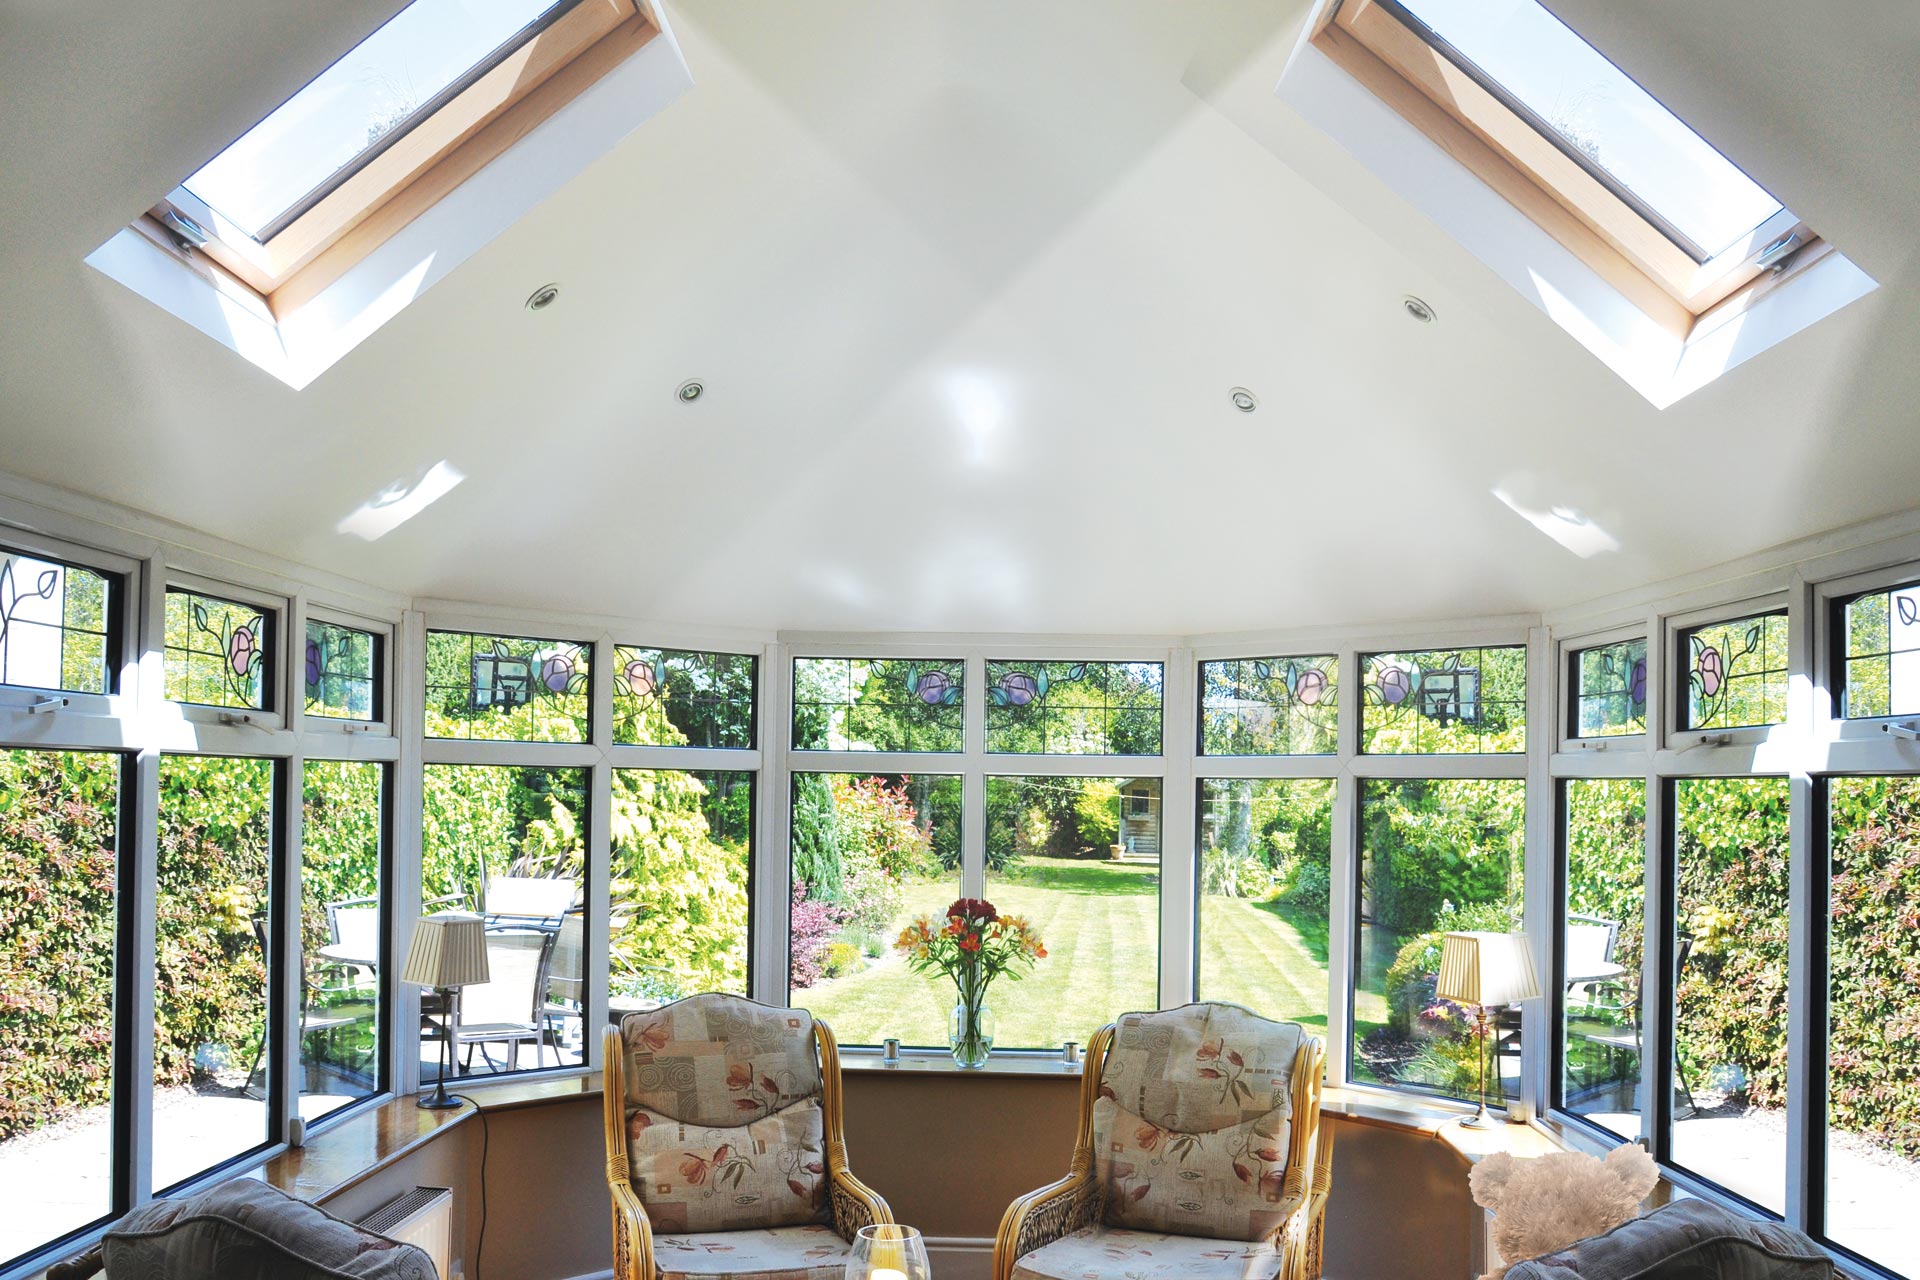 Conservatory Interior Warm Roof with Skylights Bournemouth, Poole, Christchurch